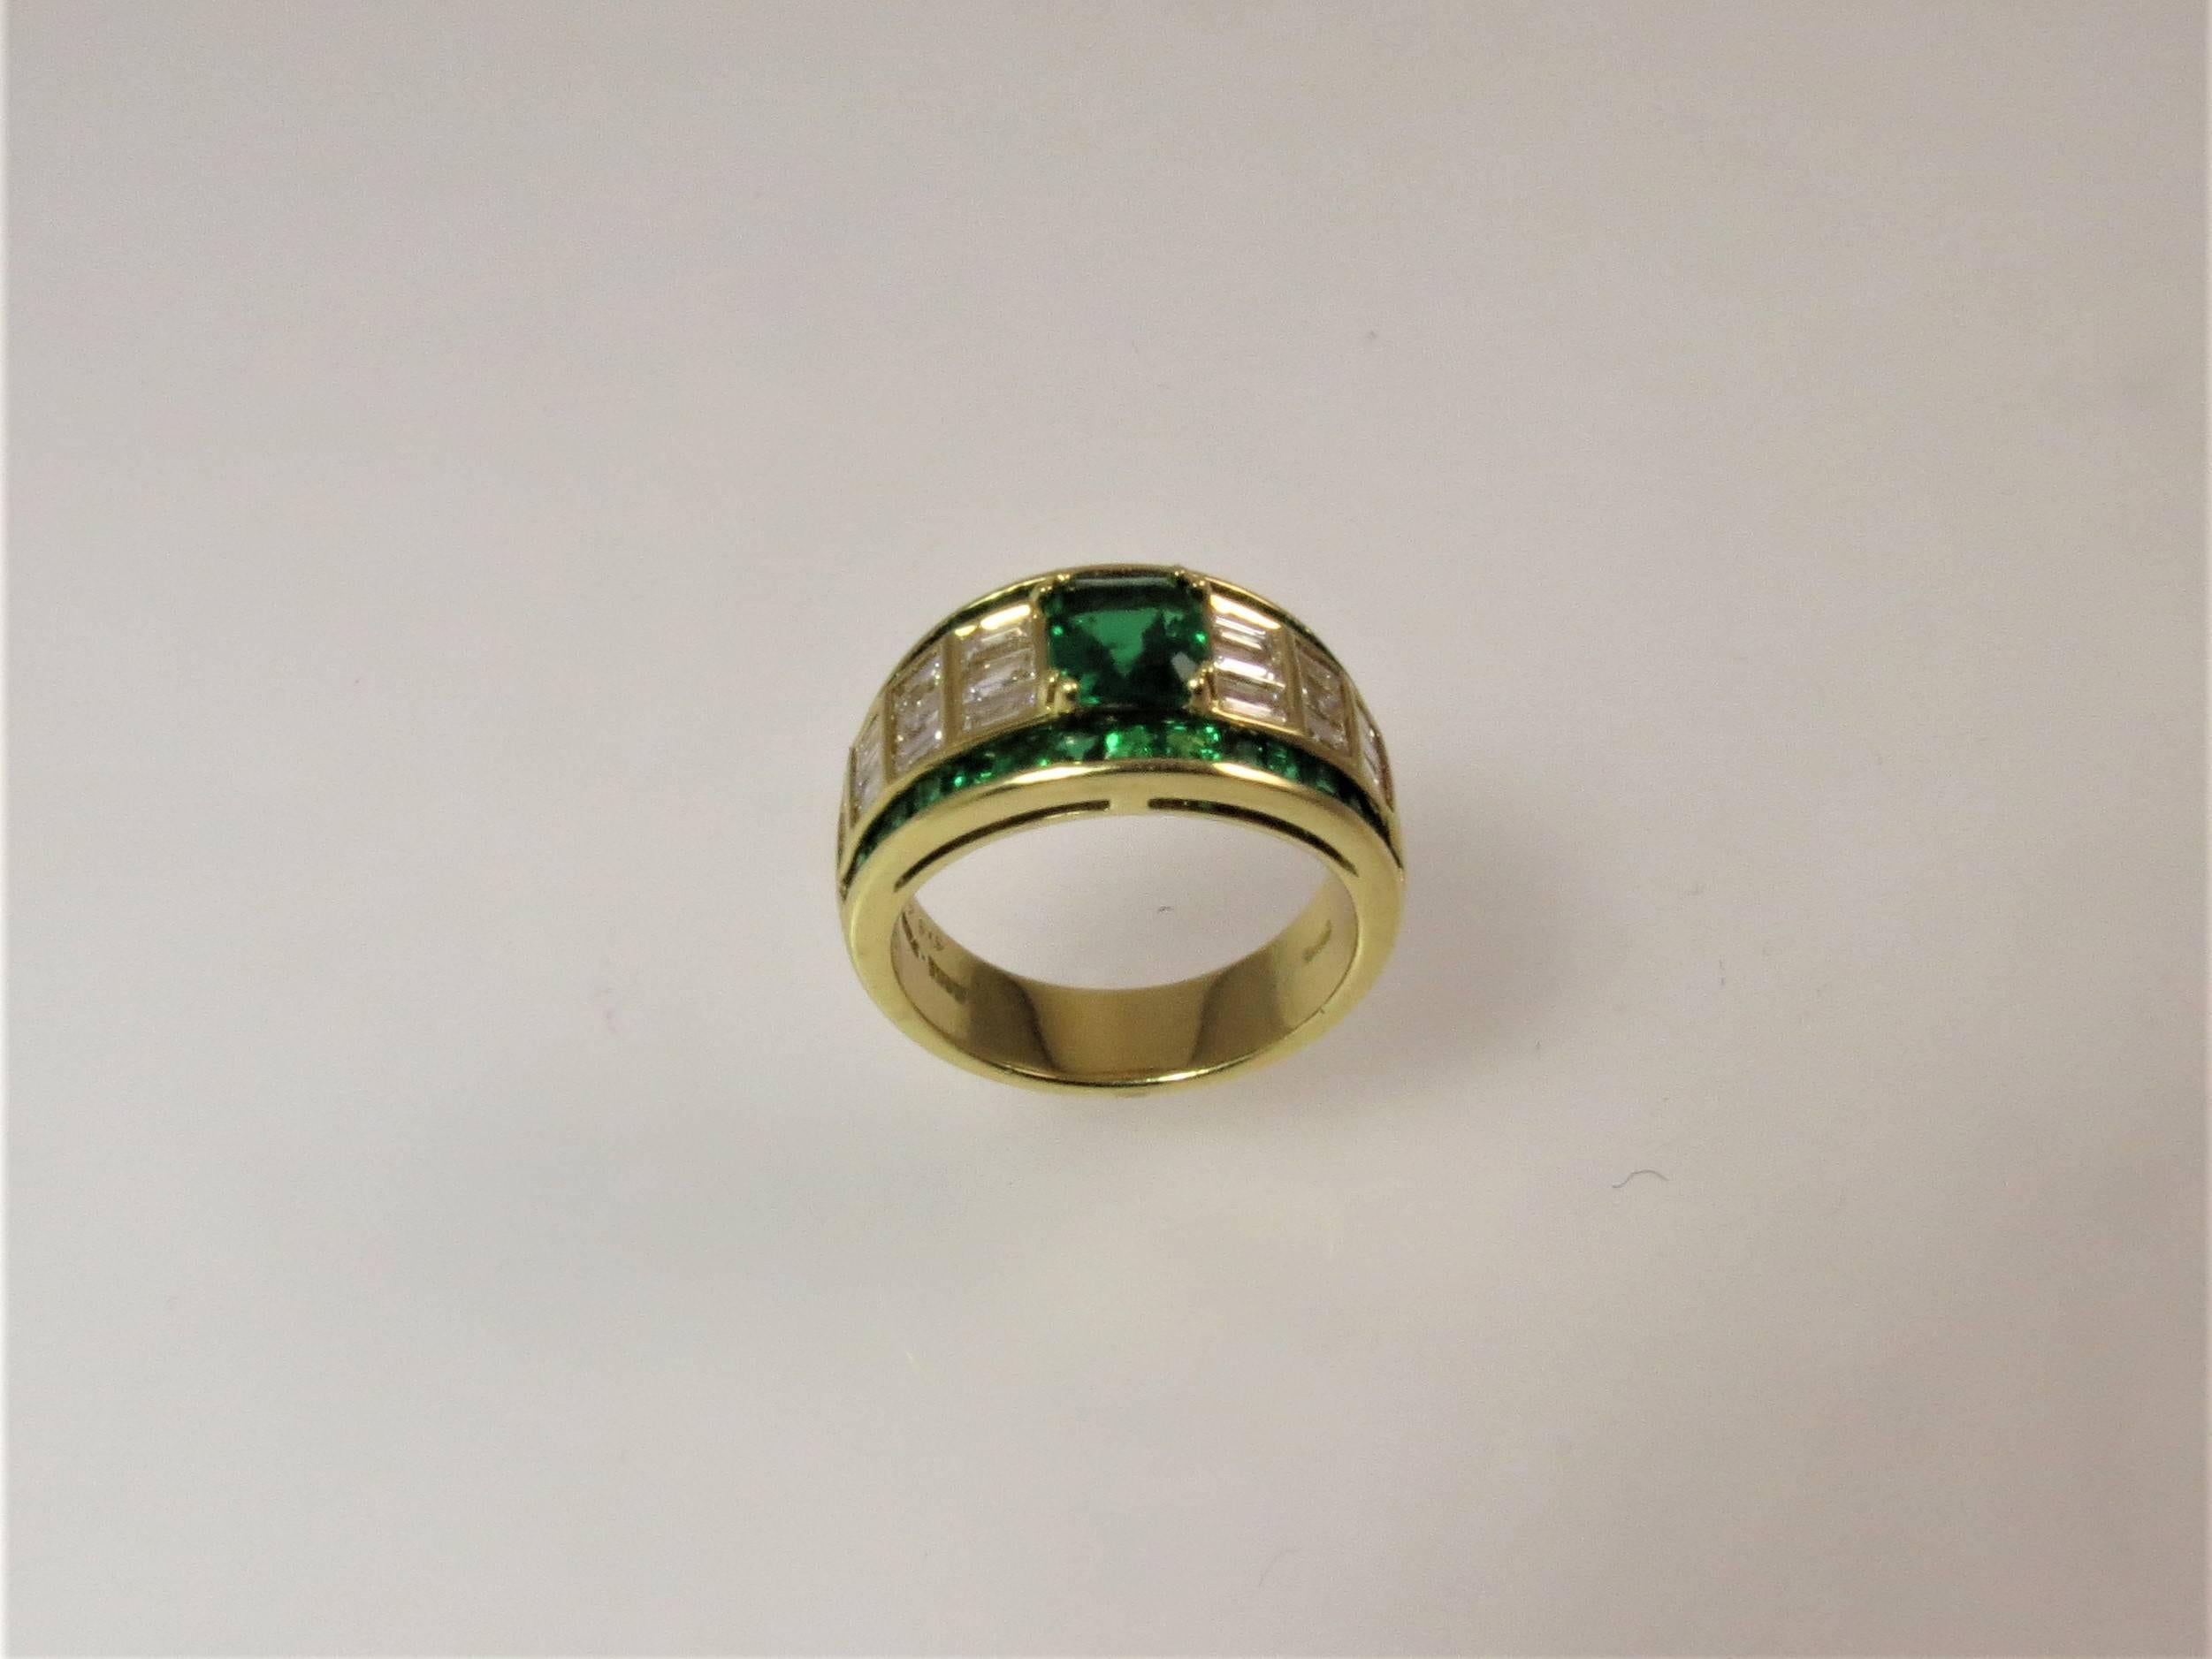 Picchiotti 18K yellow gold ring set in center with one square emerald cut emerald weighing .89cts, surrounded by 34 square emeralds weighing 1.07cts and 22 baguette diamonds weighing 1.20cts, F-G color, VS clarity.
Finger size 6.5, may be sized